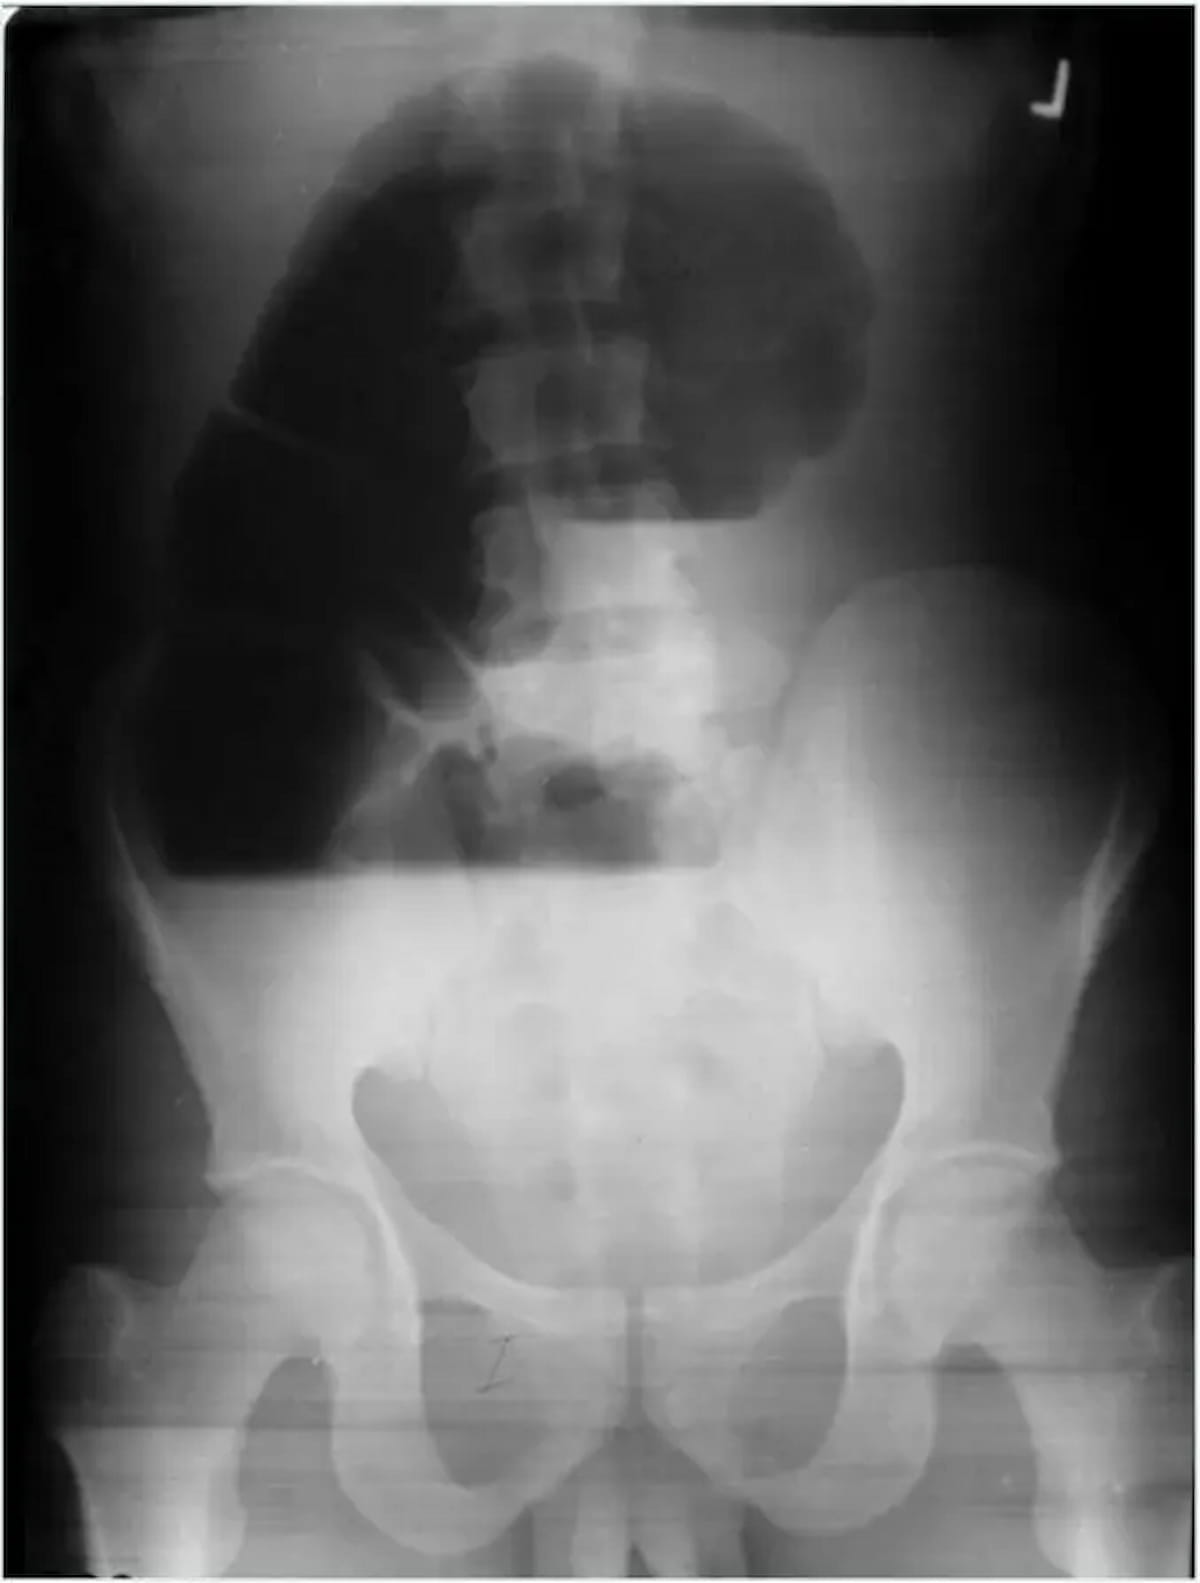 Image IQ Quiz: 40-Year-Old Patient with Abdominal Distension and Severe Abdominal Pain